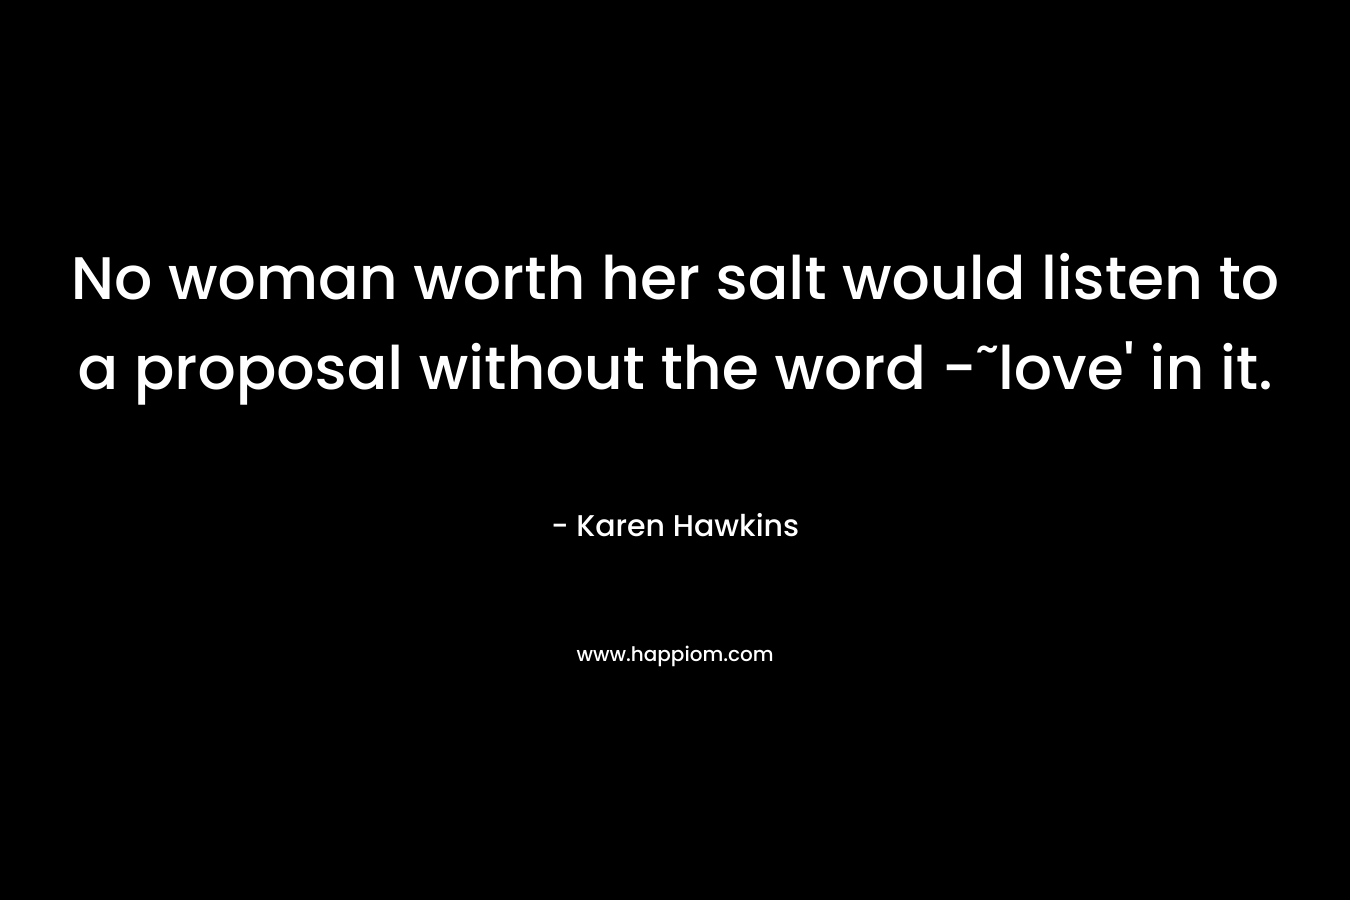 No woman worth her salt would listen to a proposal without the word -˜love' in it.